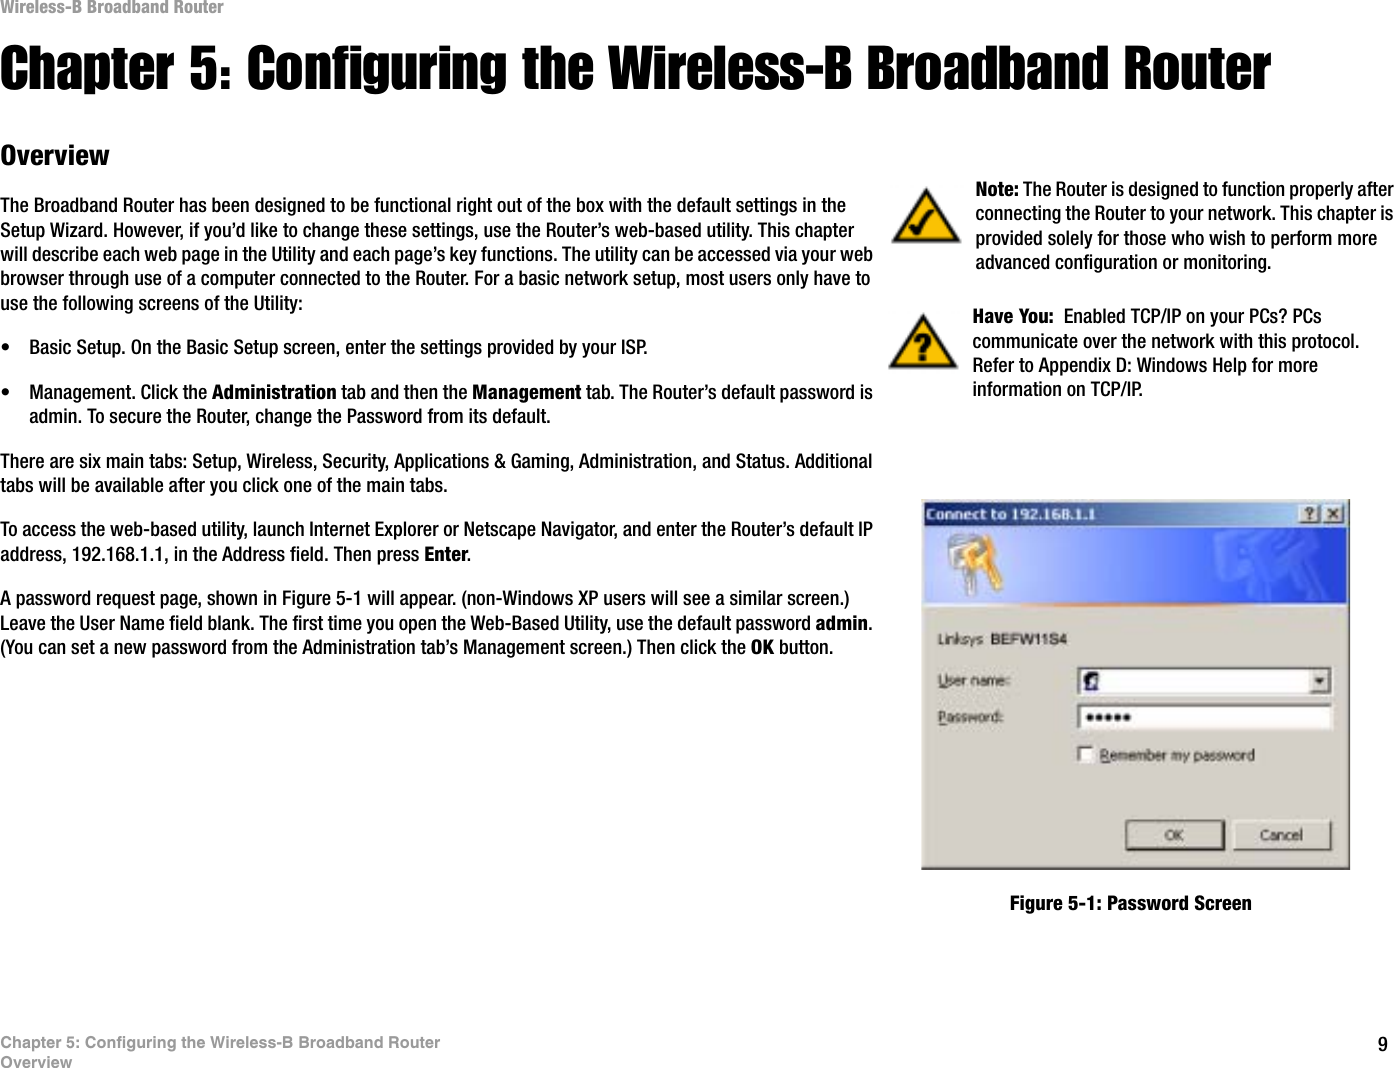 9Chapter 5: Configuring the Wireless-B Broadband RouterOverviewWireless-B Broadband RouterChapter 5: Configuring the Wireless-B Broadband RouterOverviewThe Broadband Router has been designed to be functional right out of the box with the default settings in the Setup Wizard. However, if you’d like to change these settings, use the Router’s web-based utility. This chapter will describe each web page in the Utility and each page’s key functions. The utility can be accessed via your web browser through use of a computer connected to the Router. For a basic network setup, most users only have to use the following screens of the Utility:• Basic Setup. On the Basic Setup screen, enter the settings provided by your ISP.• Management. Click the Administration tab and then the Management tab. The Router’s default password is admin. To secure the Router, change the Password from its default.There are six main tabs: Setup, Wireless, Security, Applications &amp; Gaming, Administration, and Status. Additional tabs will be available after you click one of the main tabs.To access the web-based utility, launch Internet Explorer or Netscape Navigator, and enter the Router’s default IP address, 192.168.1.1, in the Address field. Then press Enter.A password request page, shown in Figure 5-1 will appear. (non-Windows XP users will see a similar screen.) Leave the User Name field blank. The first time you open the Web-Based Utility, use the default password admin.(You can set a new password from the Administration tab’s Management screen.) Then click the OK button. Have You:  Enabled TCP/IP on your PCs? PCs communicate over the network with this protocol. Refer to Appendix D: Windows Help for more information on TCP/IP.Note: The Router is designed to function properly after connecting the Router to your network. This chapter is provided solely for those who wish to perform more advanced configuration or monitoring.Figure 5-1: Password Screen